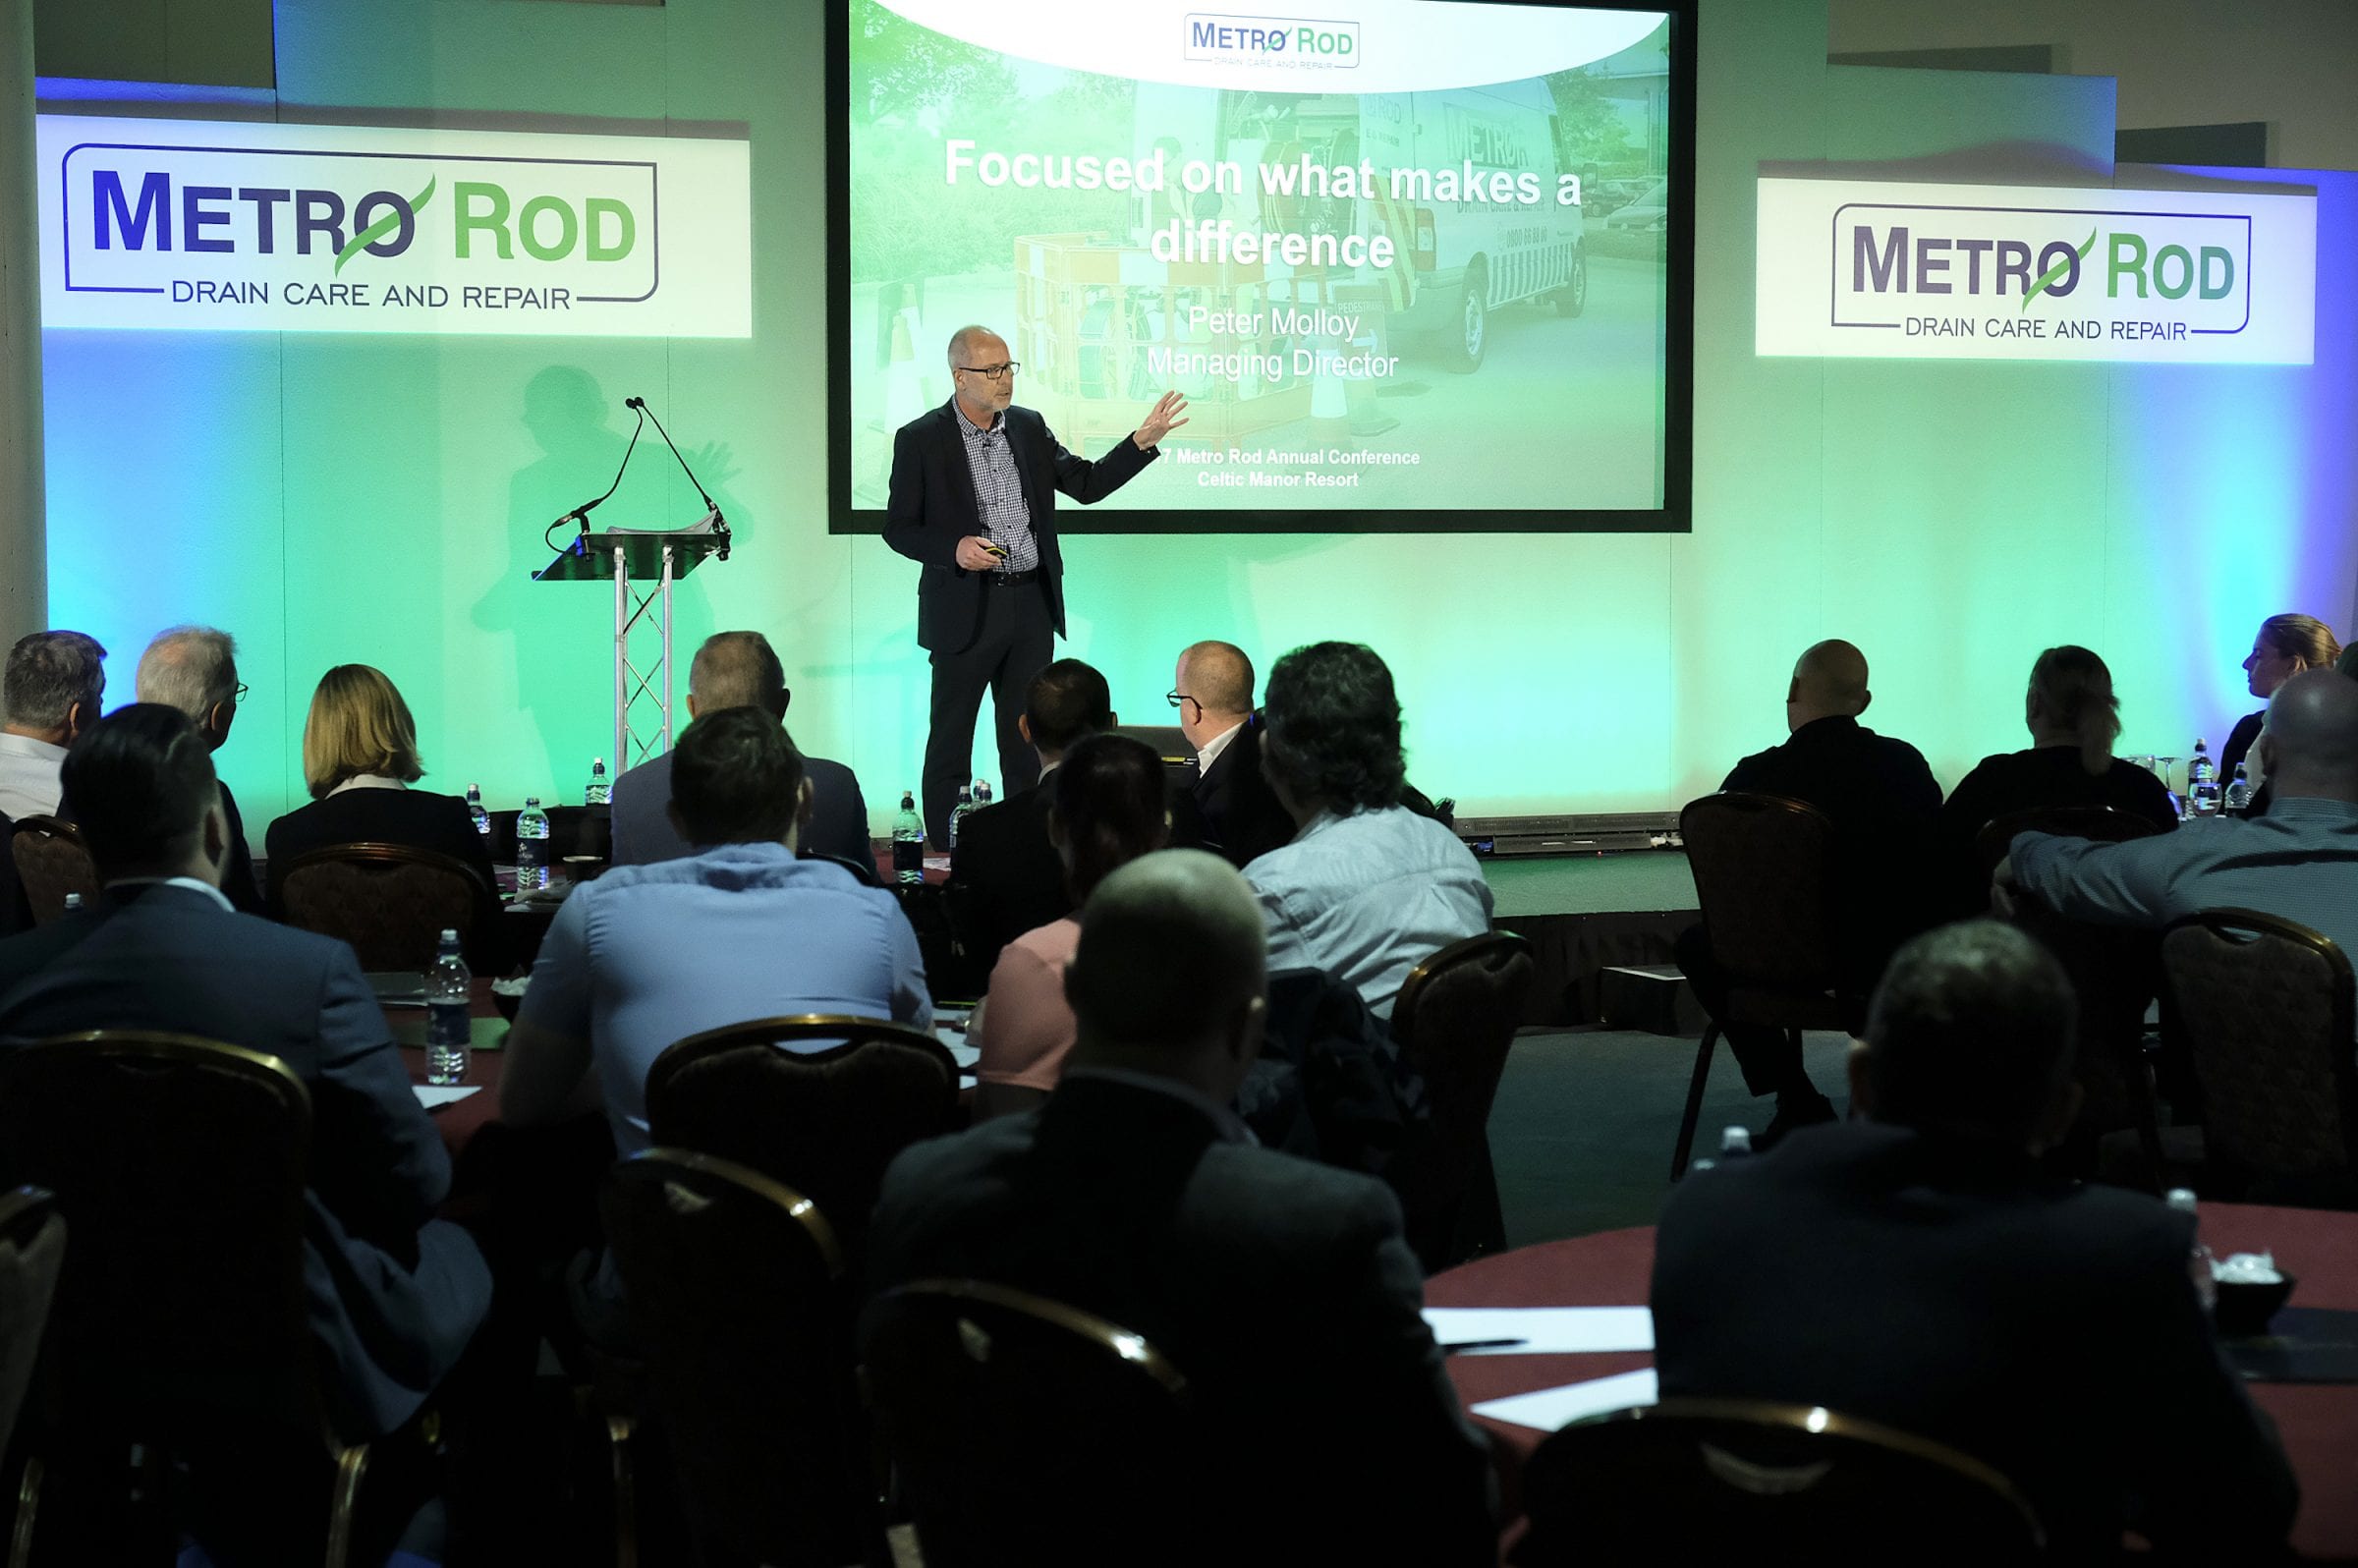 Metro Rod celebrates at inaugural Conference and Awards ceremony 2017